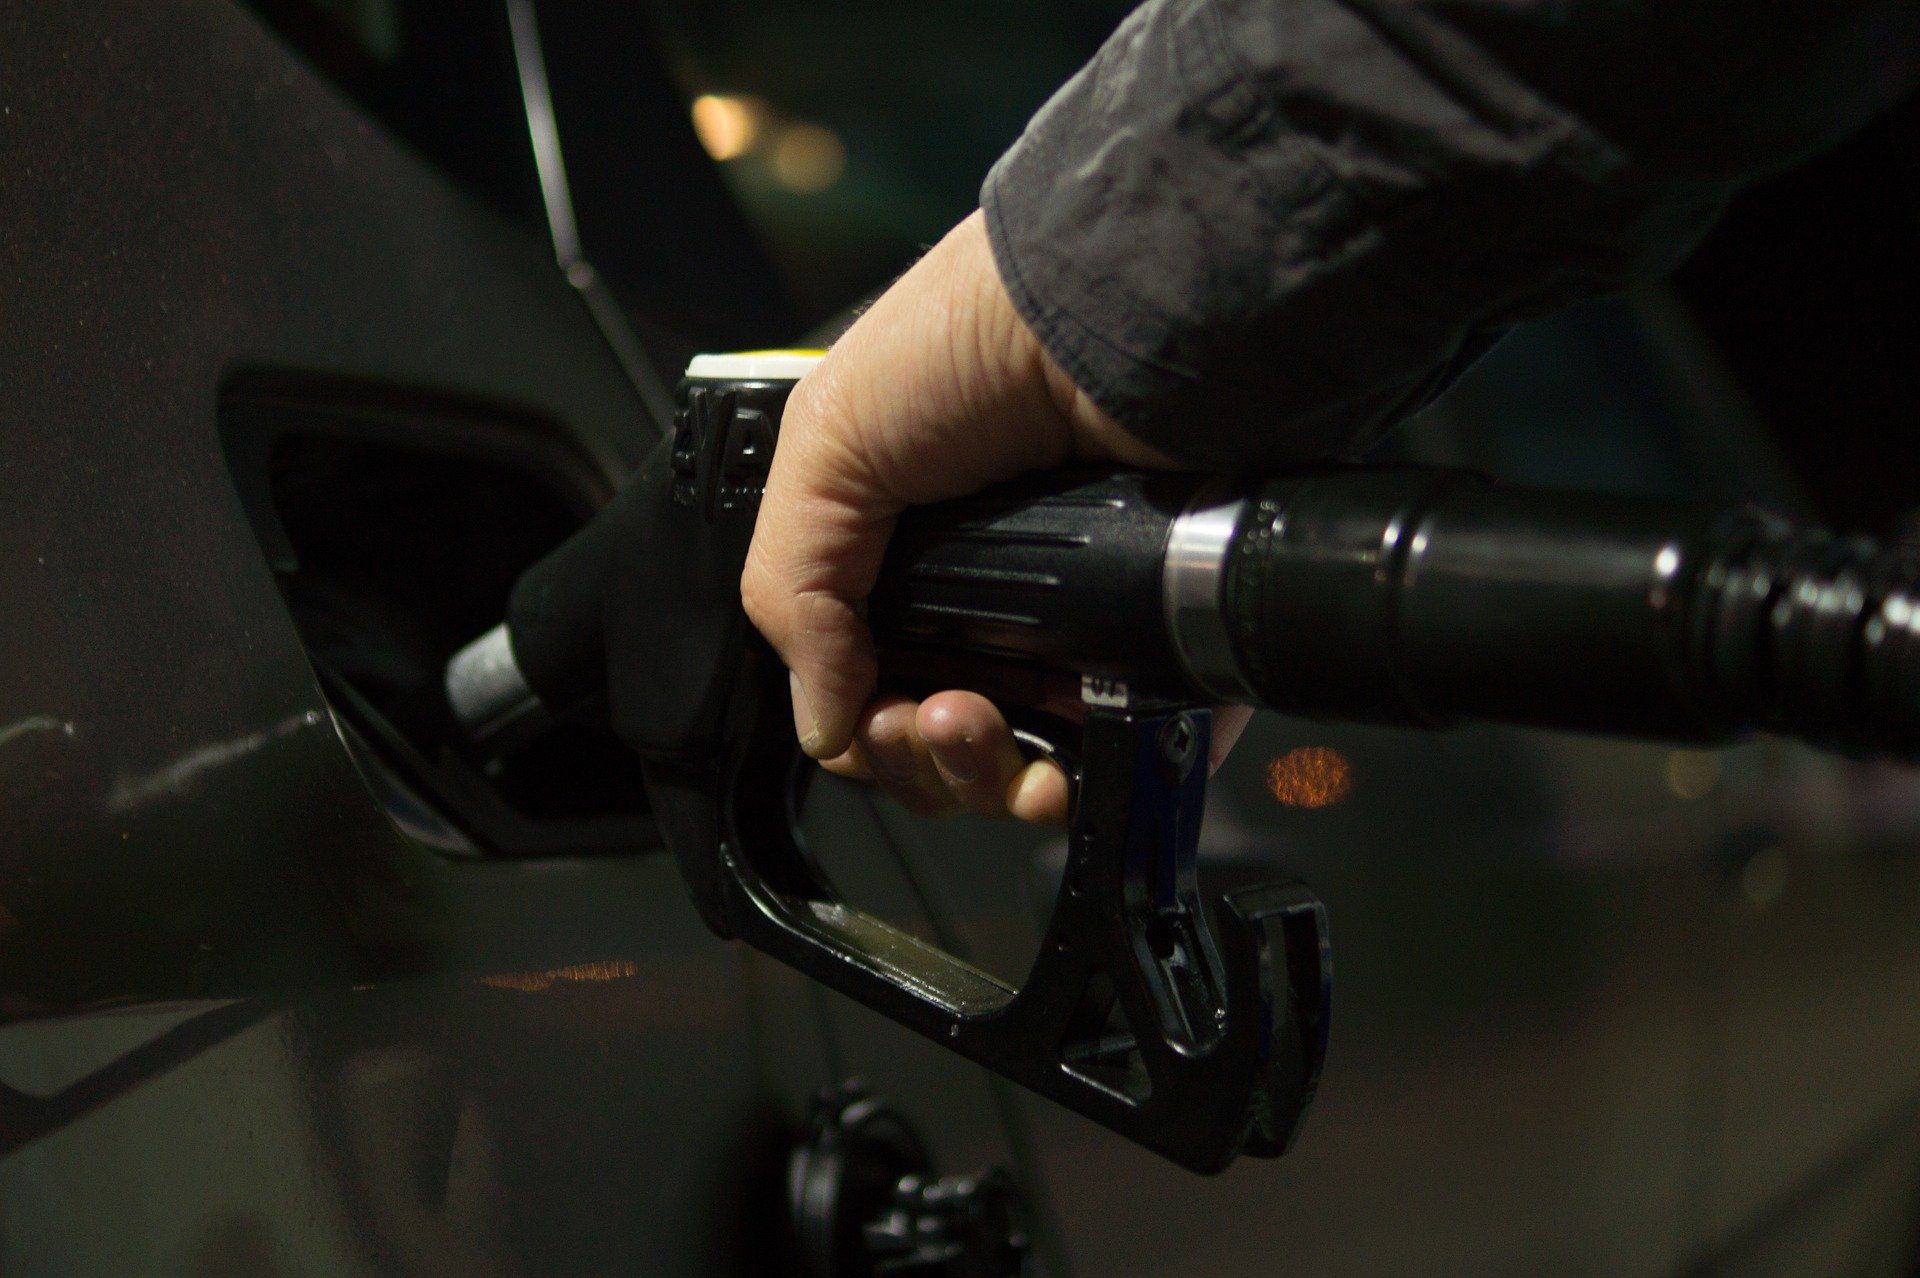 Fuel price today: Petrol and Diesel rates remain unchanged on May 19, 2022